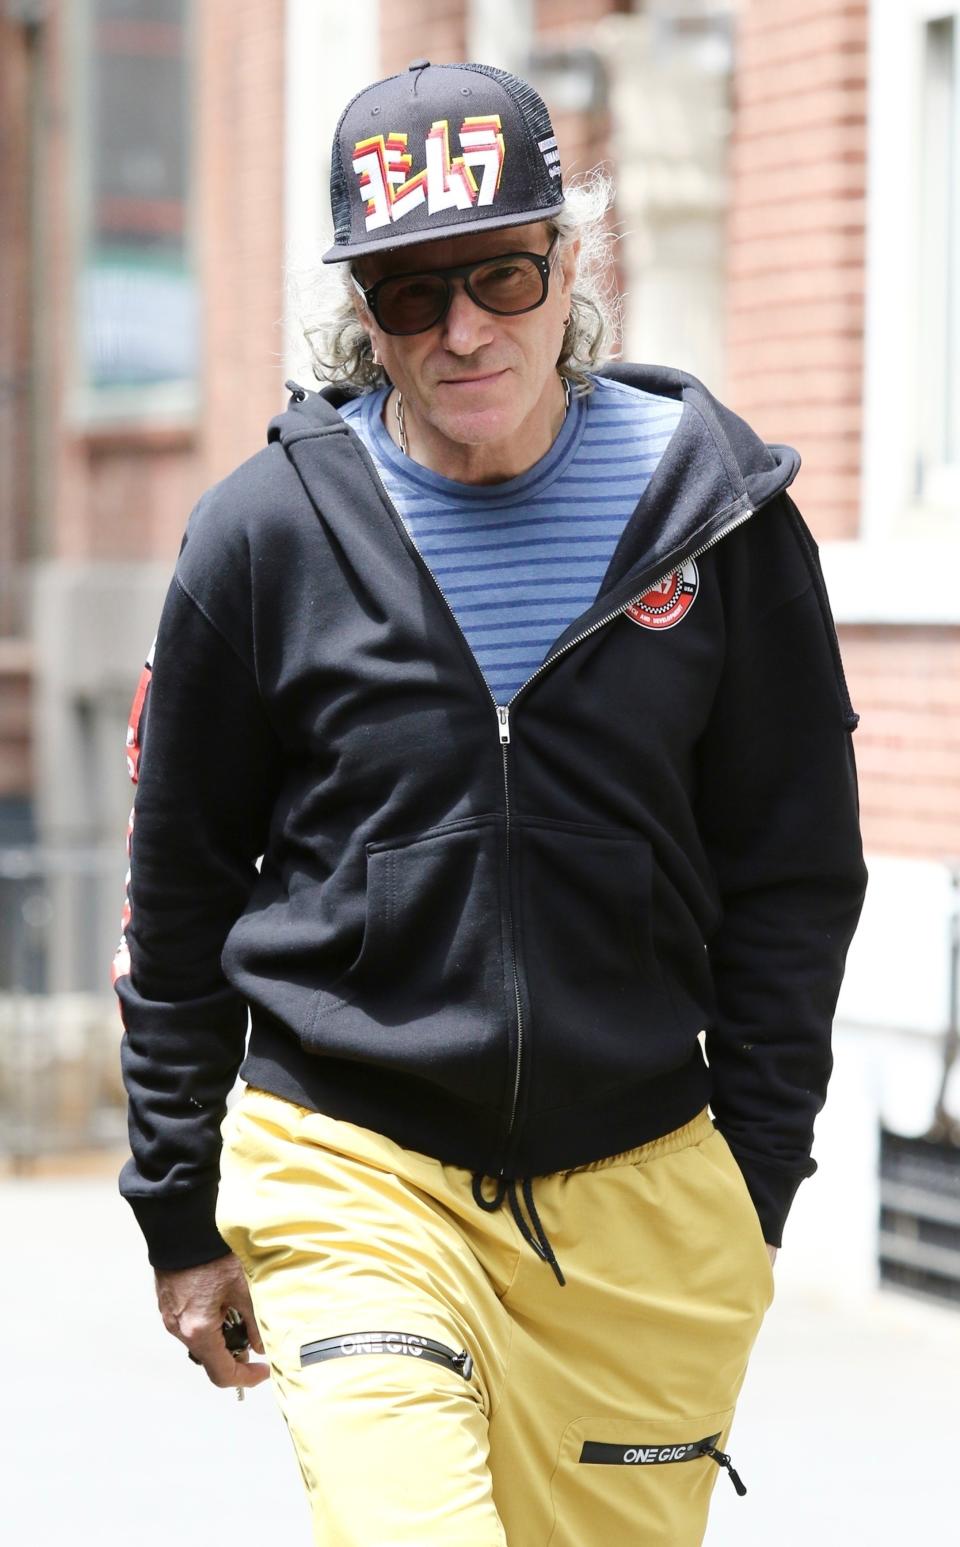 A swagged-out Daniel Day-Lewis, as seen in New York City last spring.